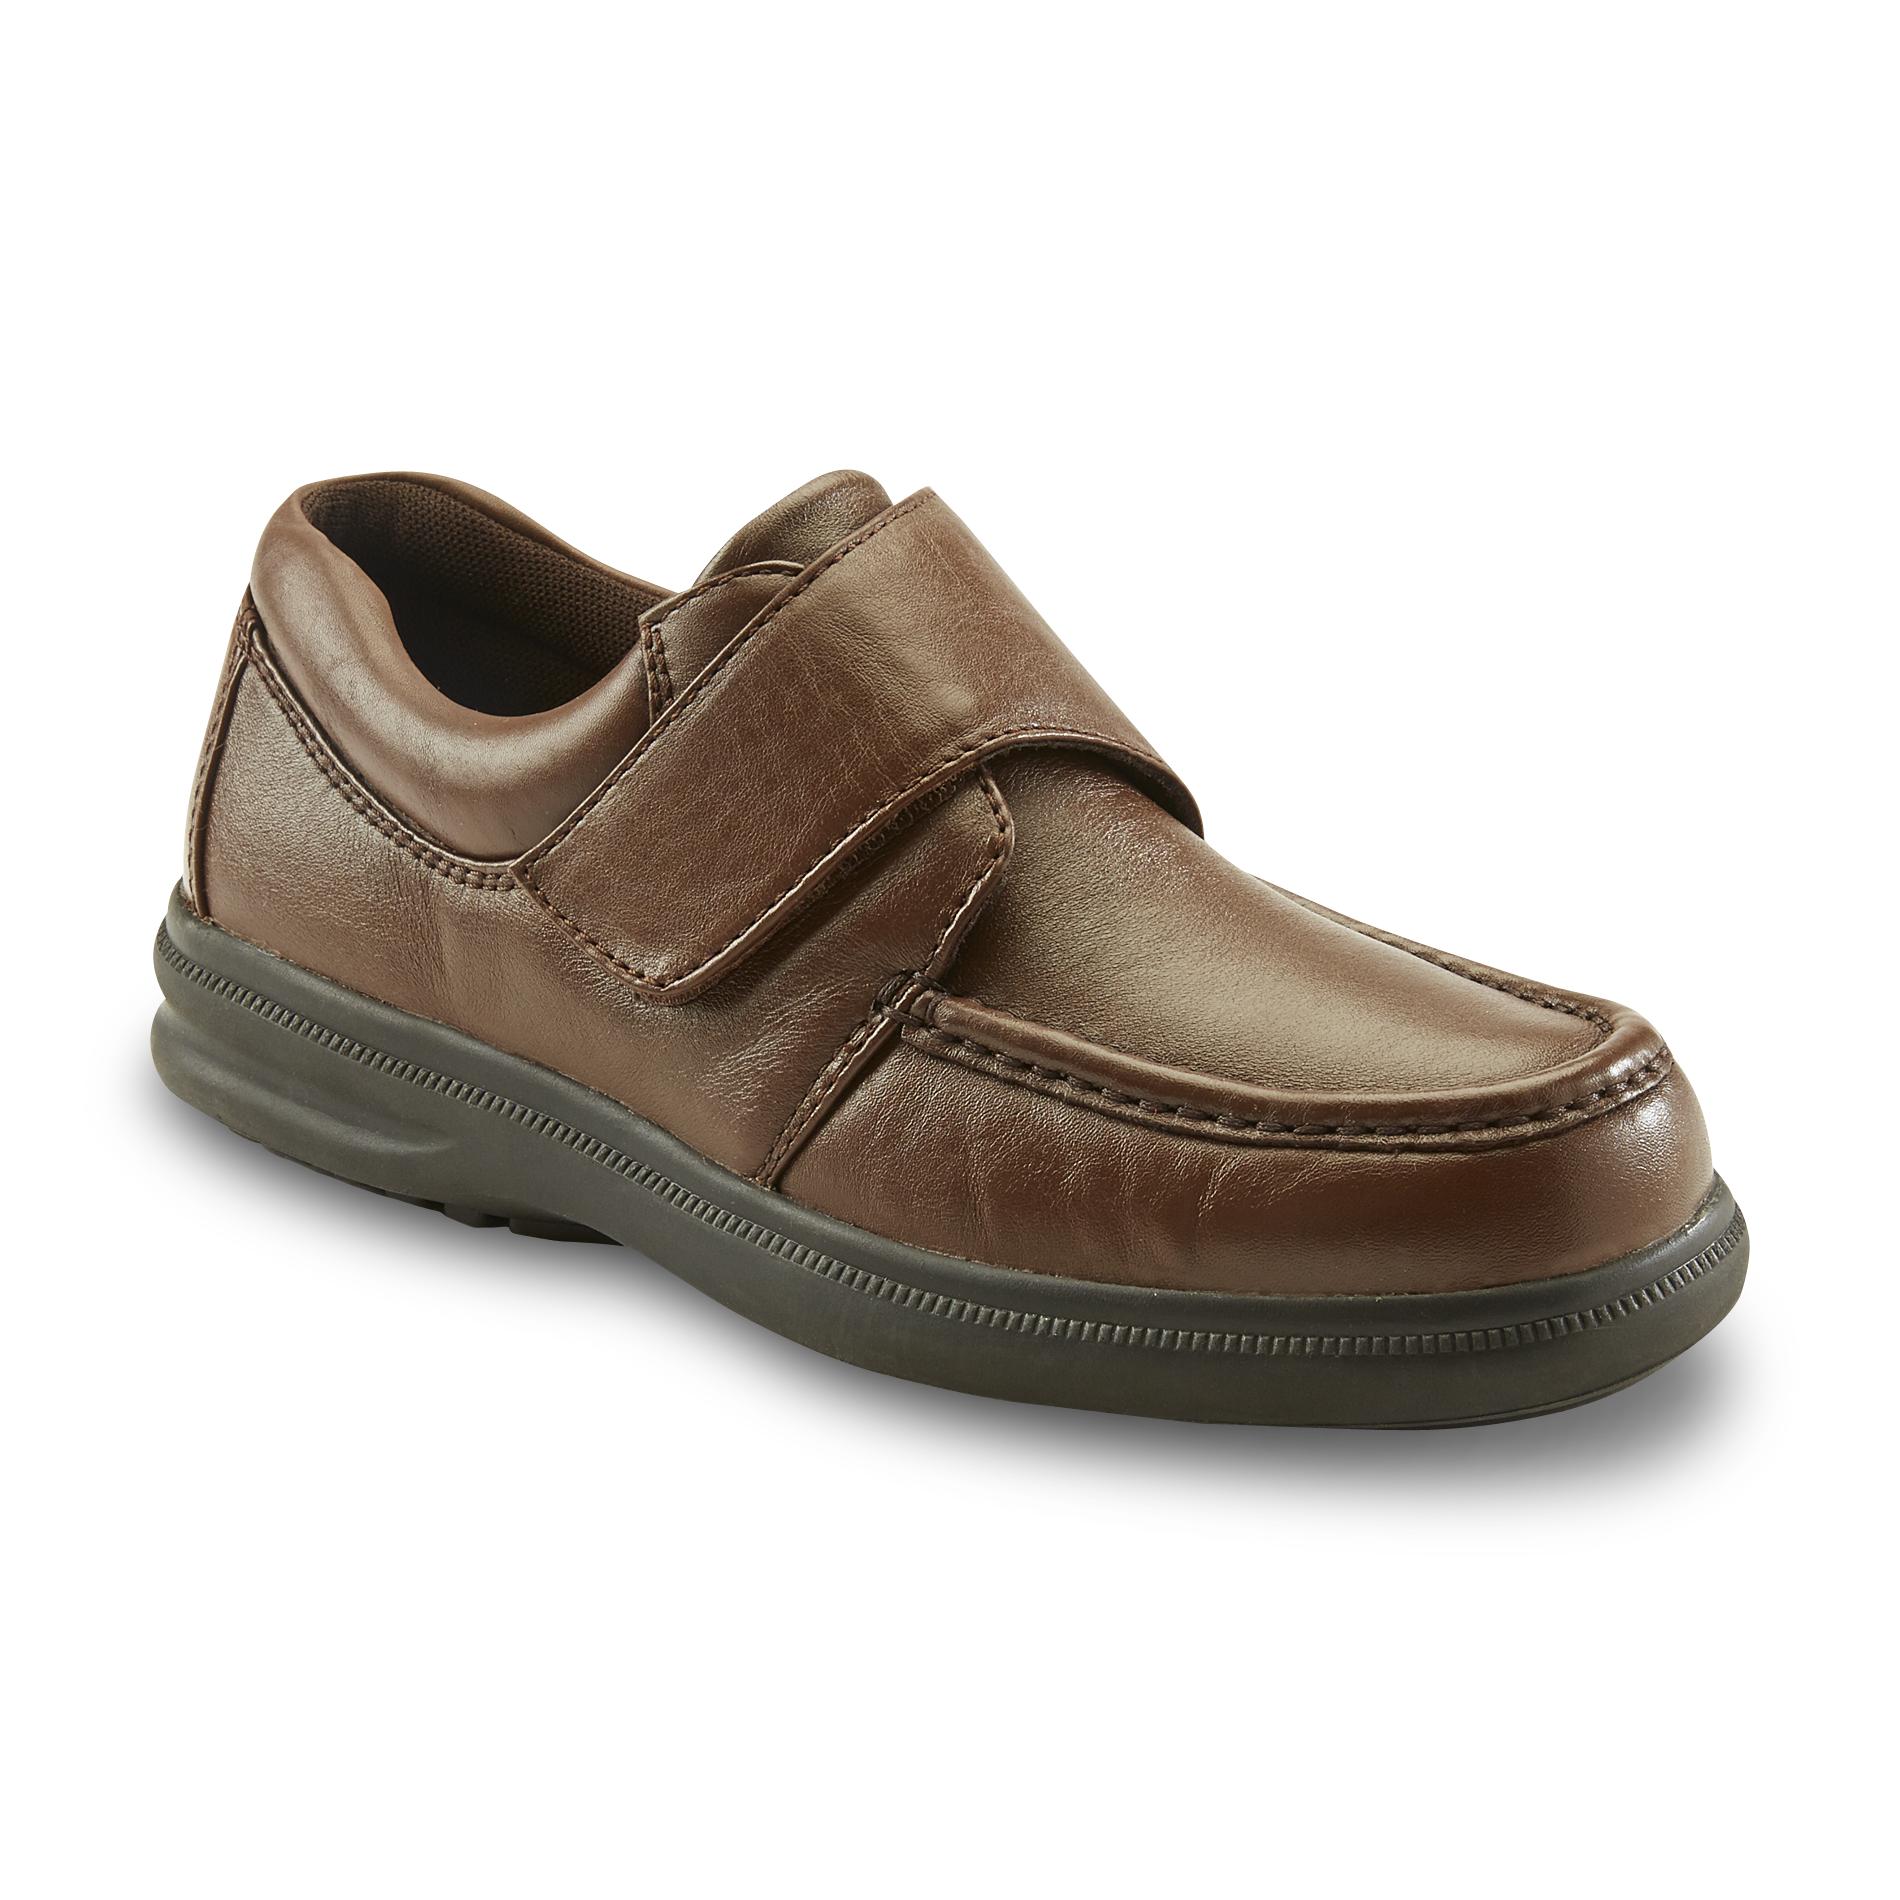 Hush Puppies Men's Gil Brown Leather Loafer - Clothing, Shoes & Jewelry ...